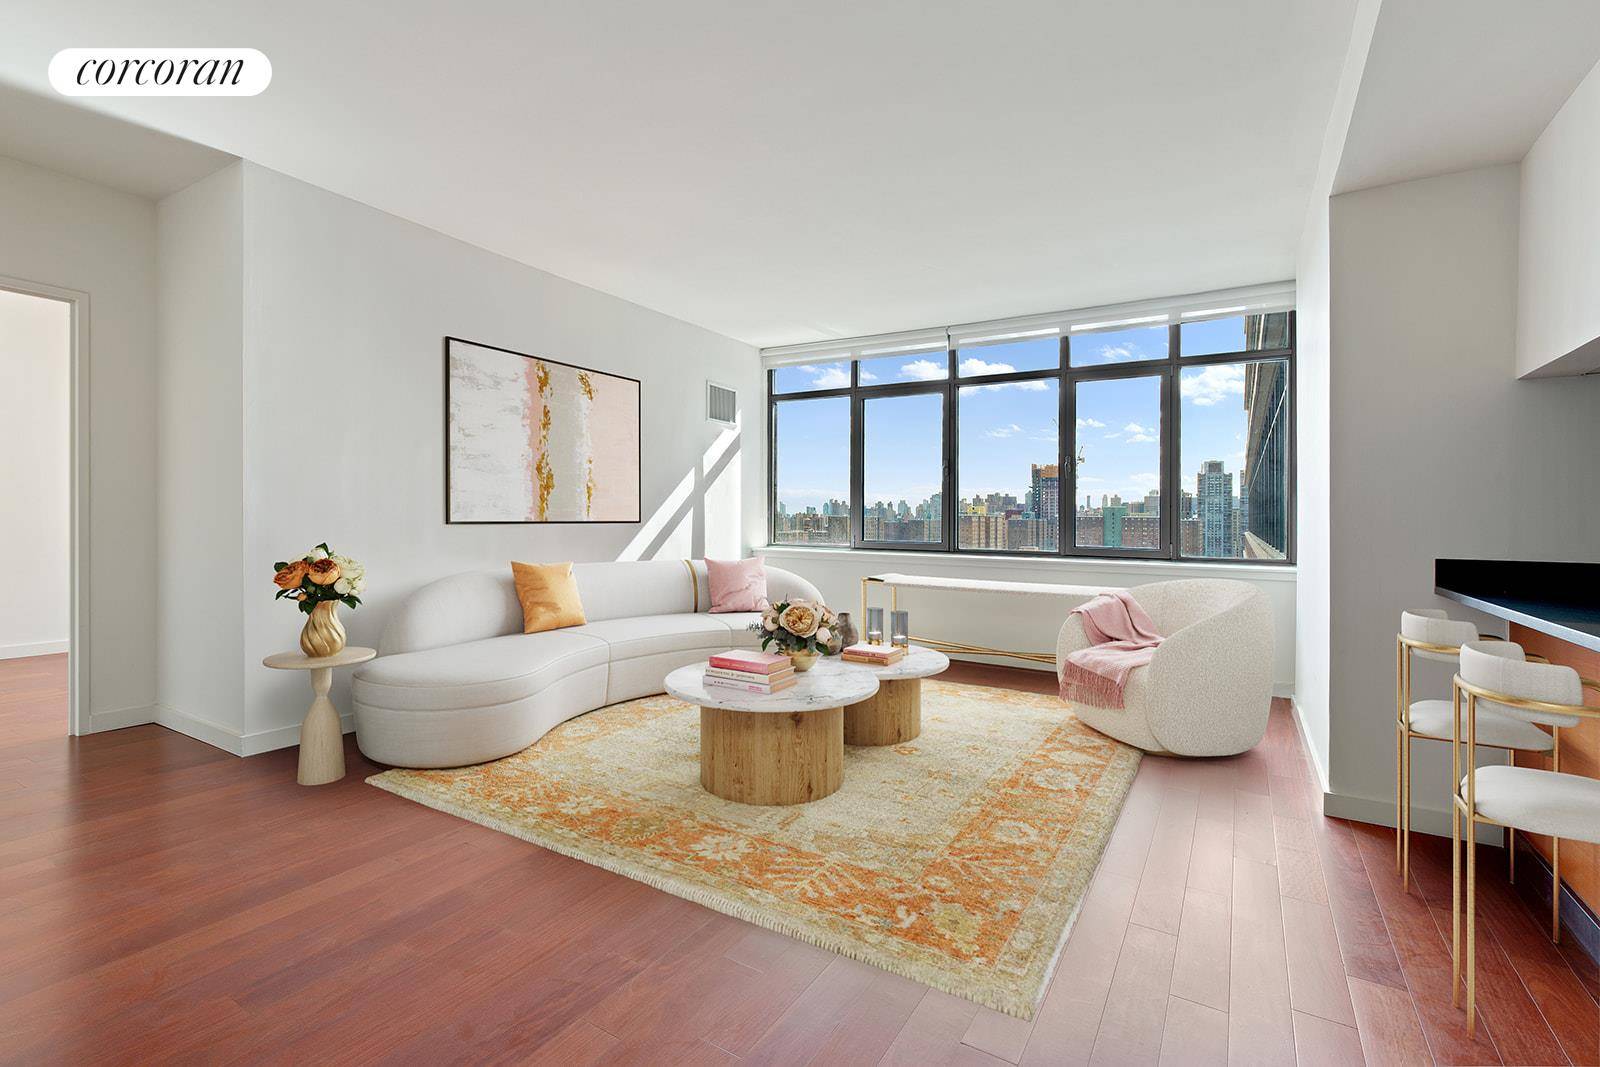 This bright one bedroom residence with incredibly low taxes is perched on the 16th floor and features oversized South facing windows that boast views of Central Park and beyond.